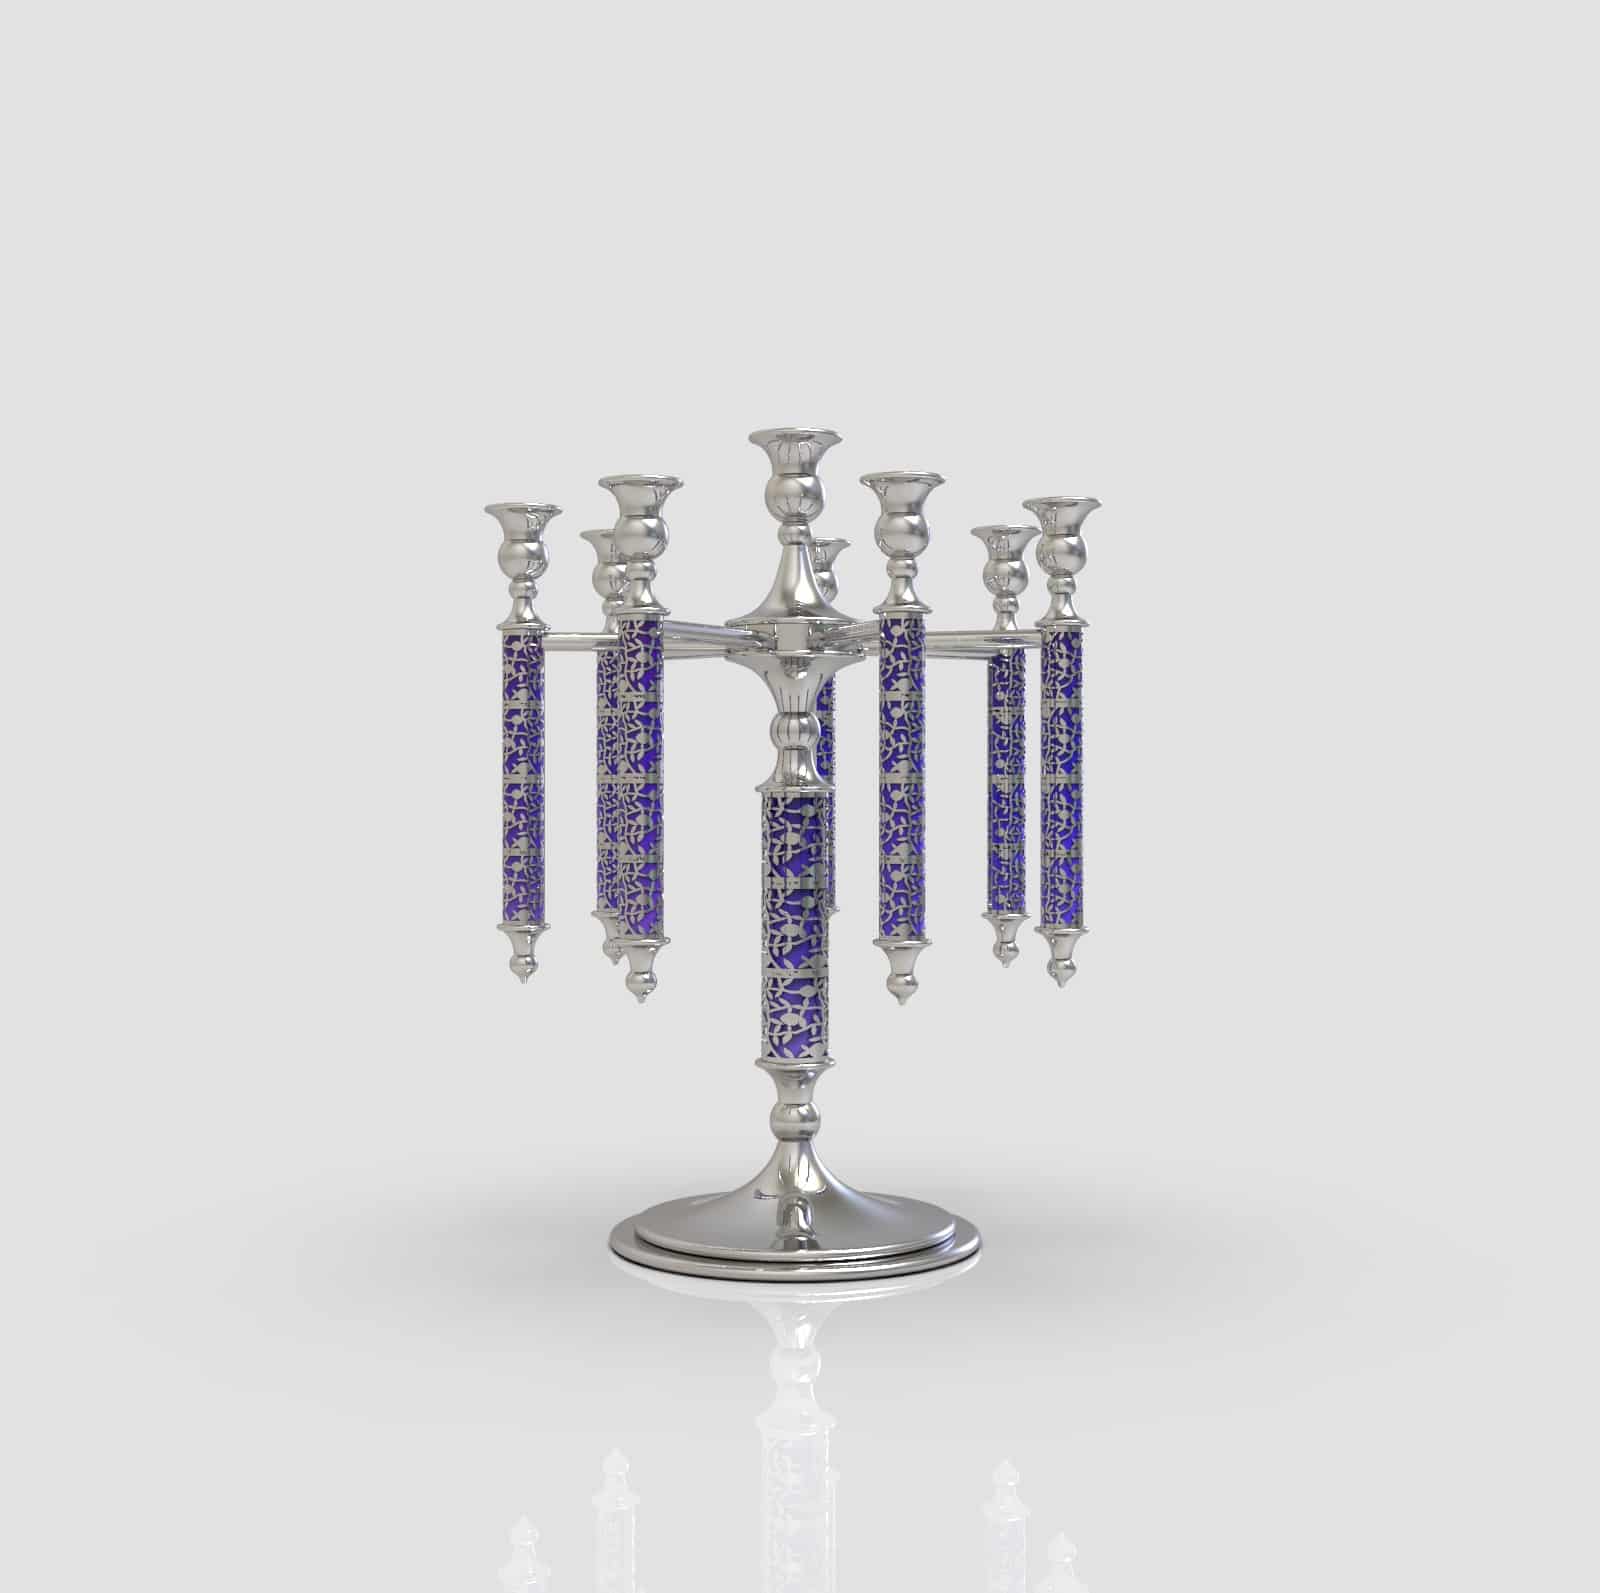 Colorful Candlesticks with Leaf Cut Out Design